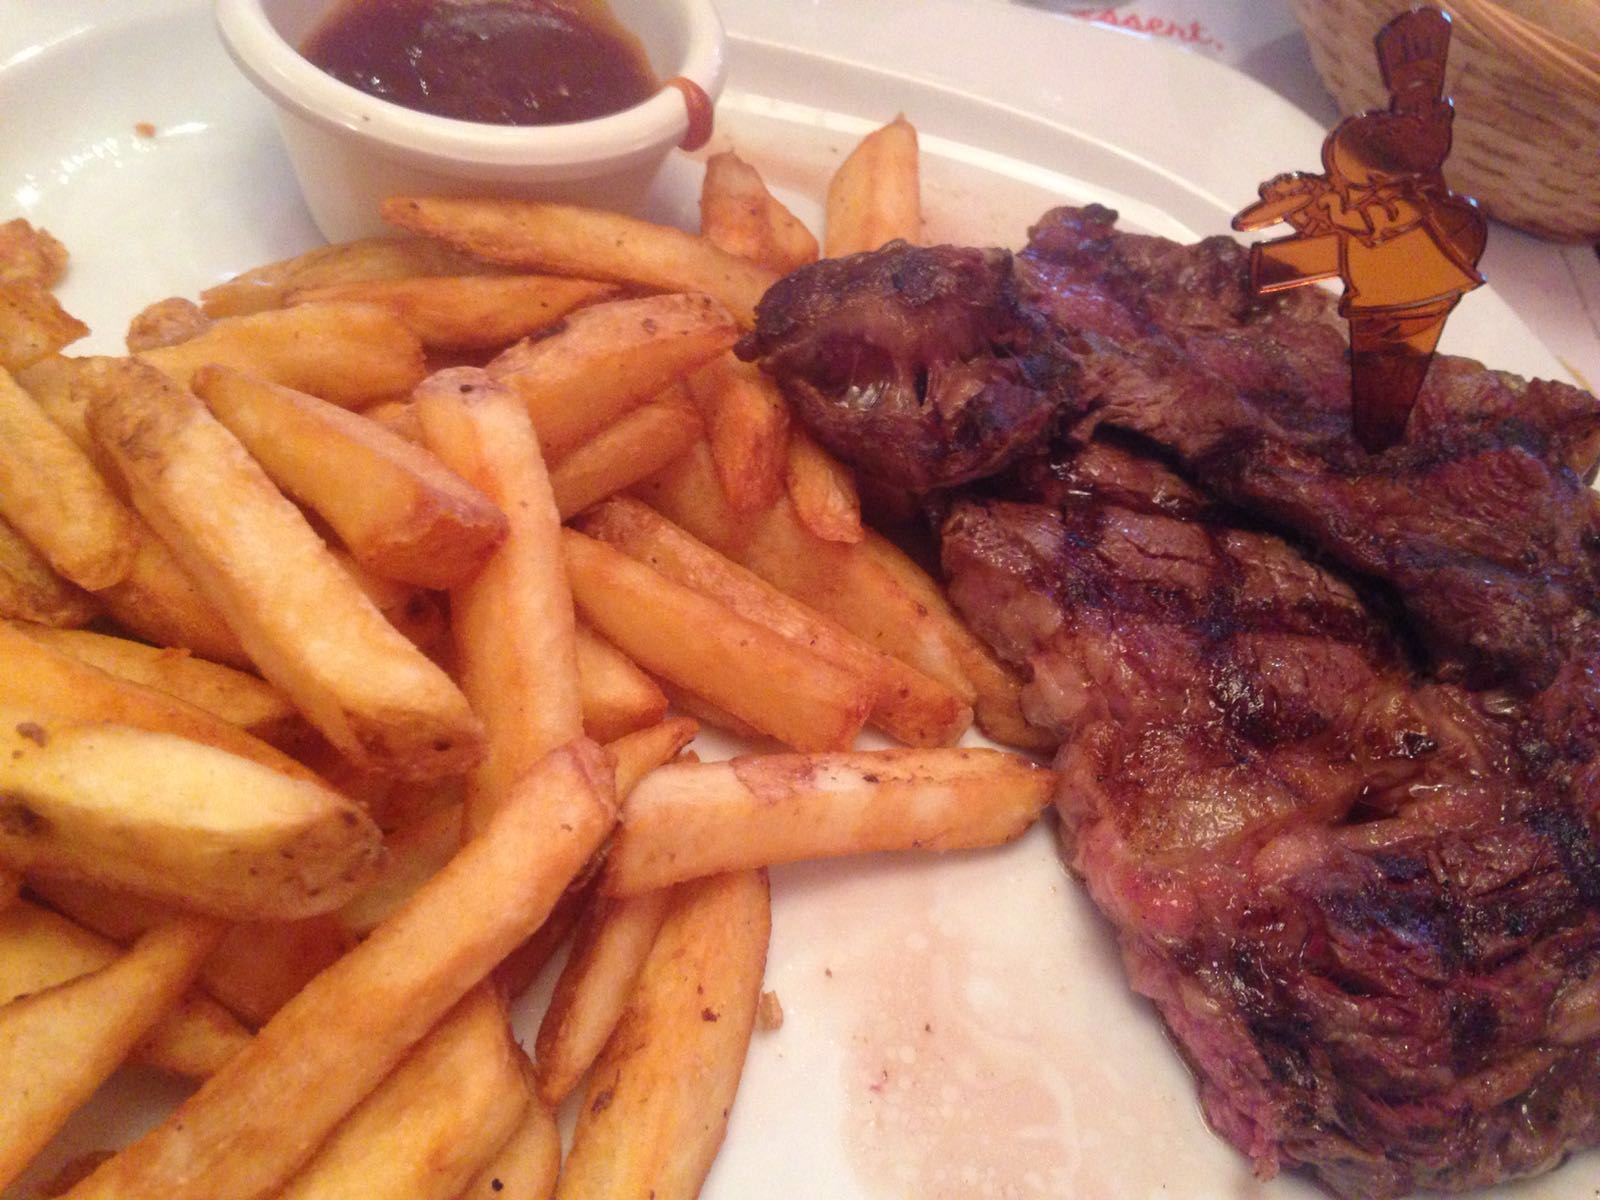 Steak and chips at the Hippopotamus Grill outside Gare du Nord station